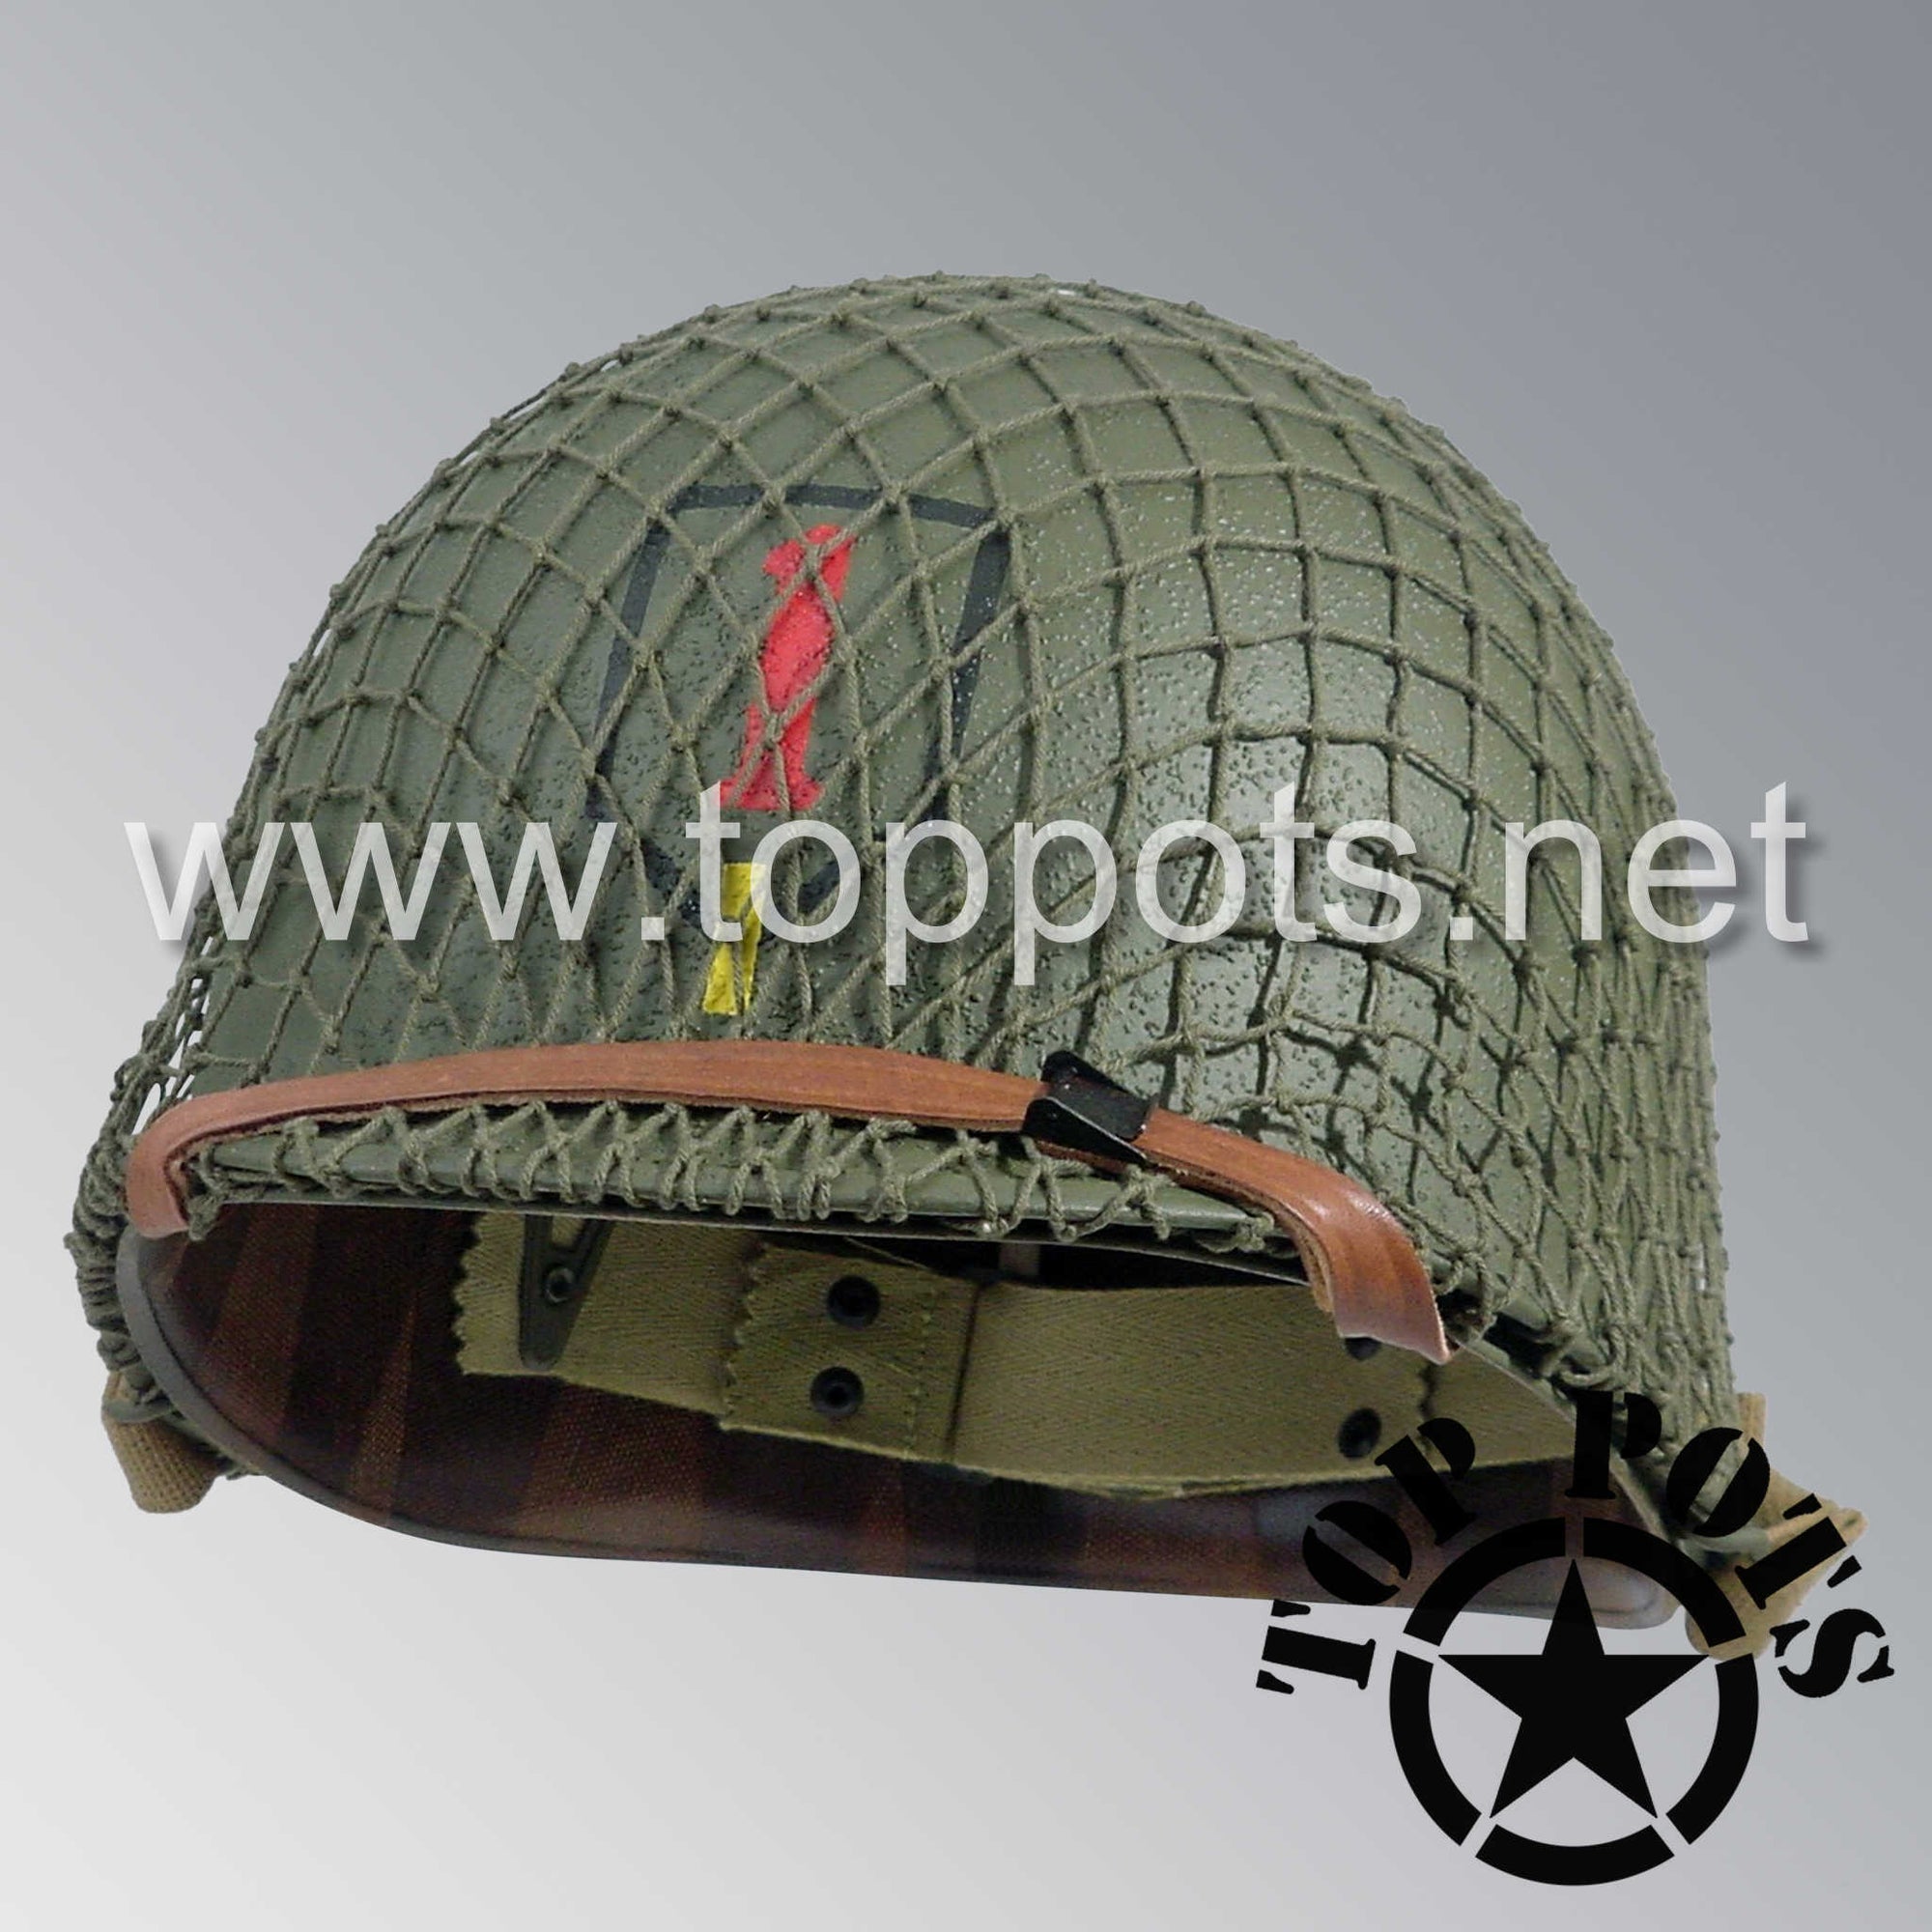 WWII US Army Restored Original M1 Infantry Helmet Swivel Bale Shell and Liner with 1st Infantry Division Officer Emblem